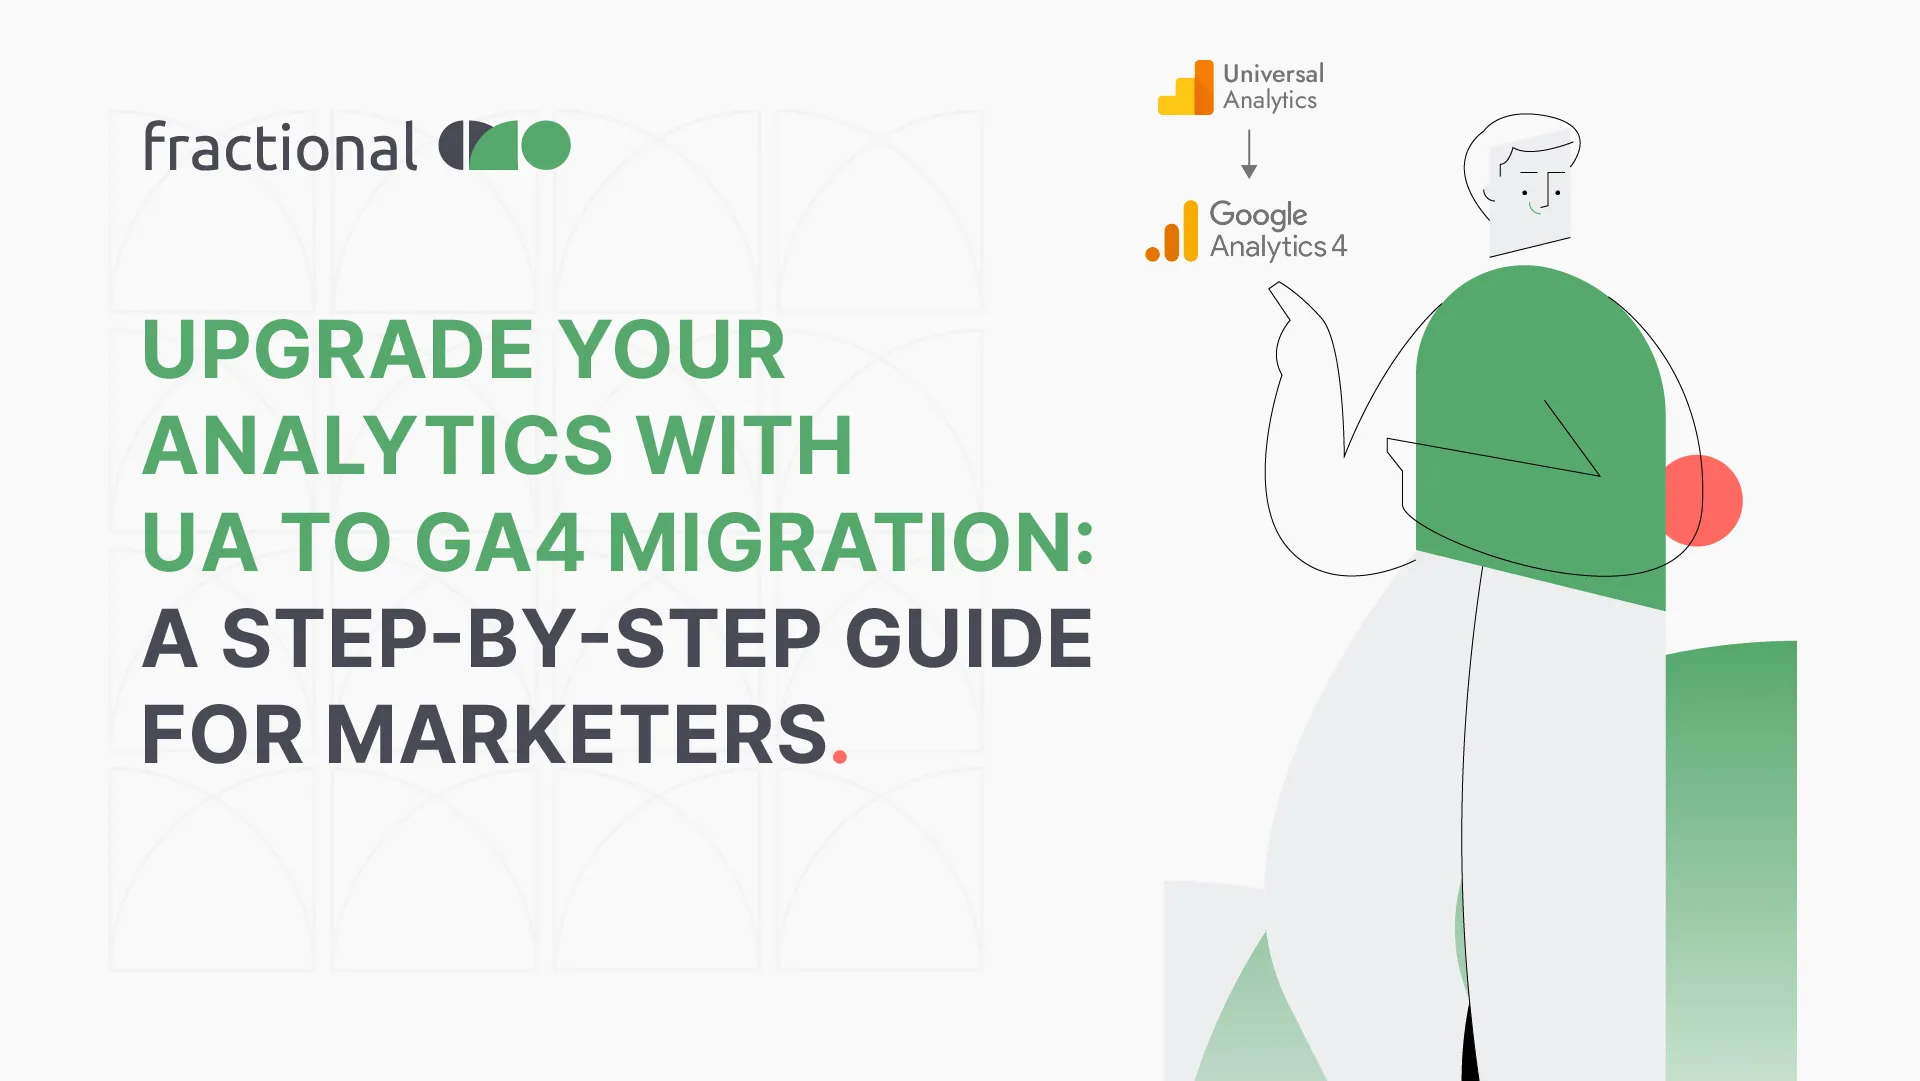 Upgrade Your Analytics With UA to GA4 Migration: A Detailed Guide For Marketers